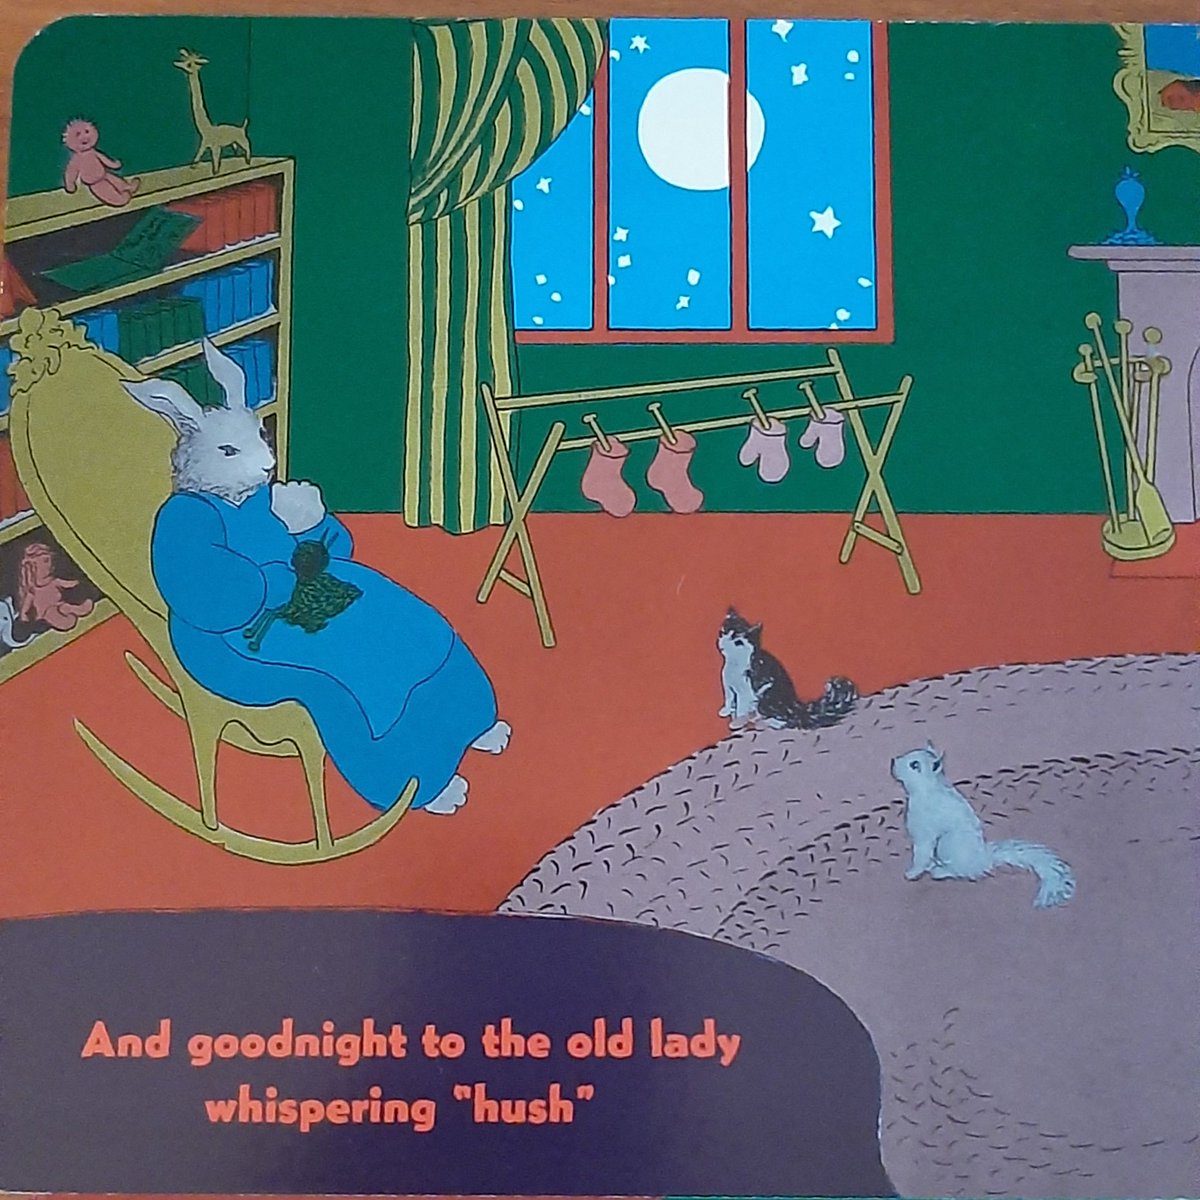 She's a ghost.
I've read Goodnight Moon 1000xs now, and am convinced. Even the cats know.
The scared kid keeps listing things in his room until she disappears and it's safe to sleep. This is a ghost story.